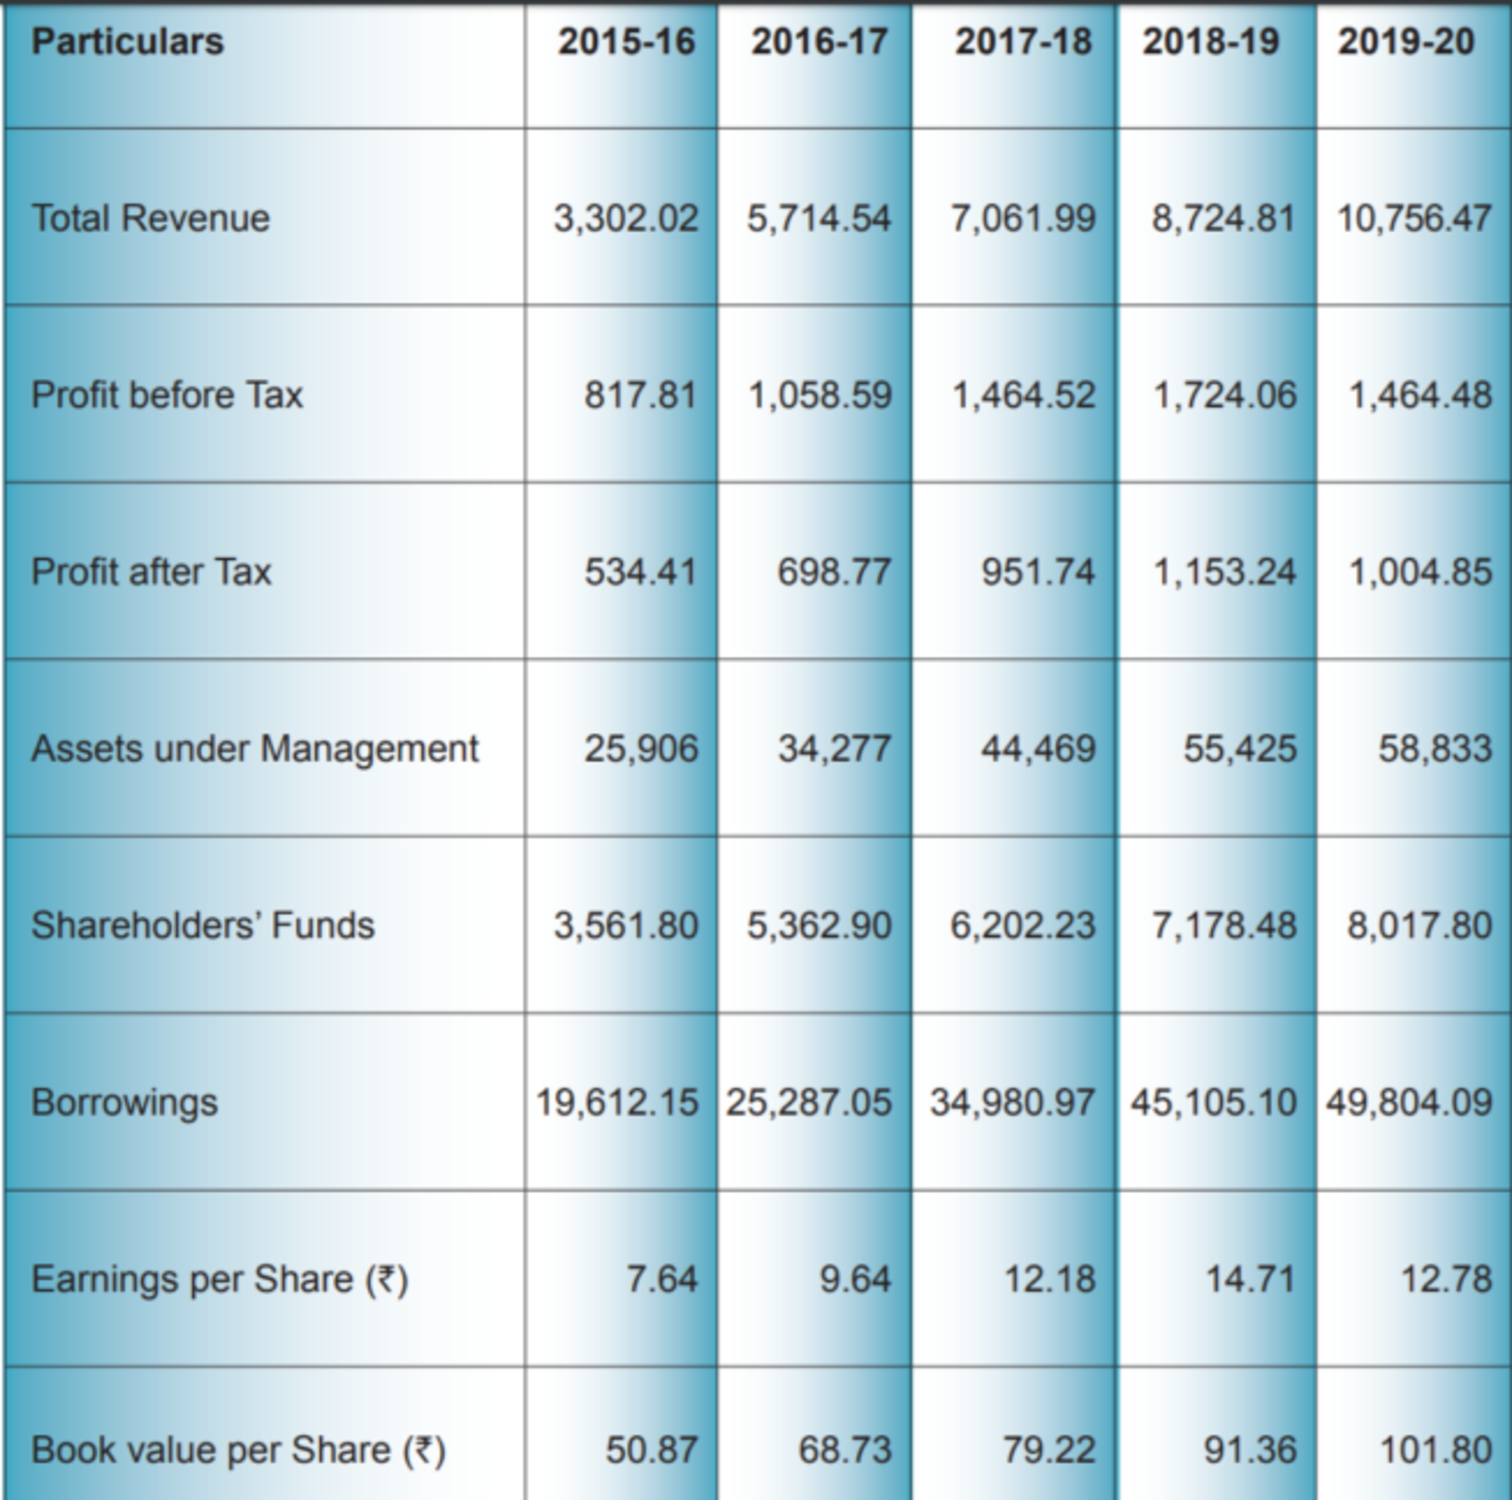 HDB Financial Service Revenue Turnover year by year